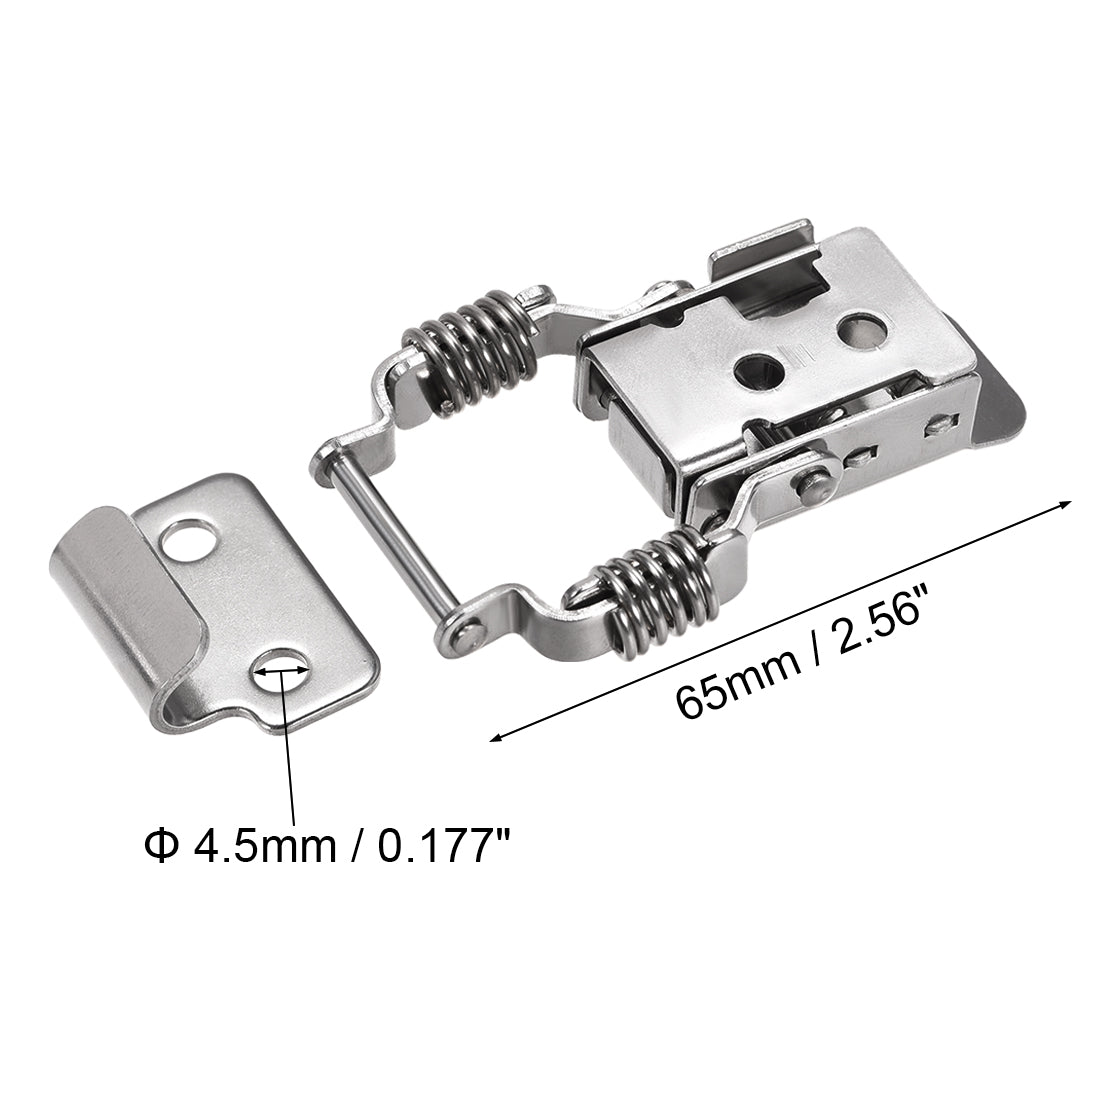 uxcell Uxcell 2.56-inch SUS304 Stainless Steel Draw Toggle Latch Self-locking Buckles - 2 Pcs